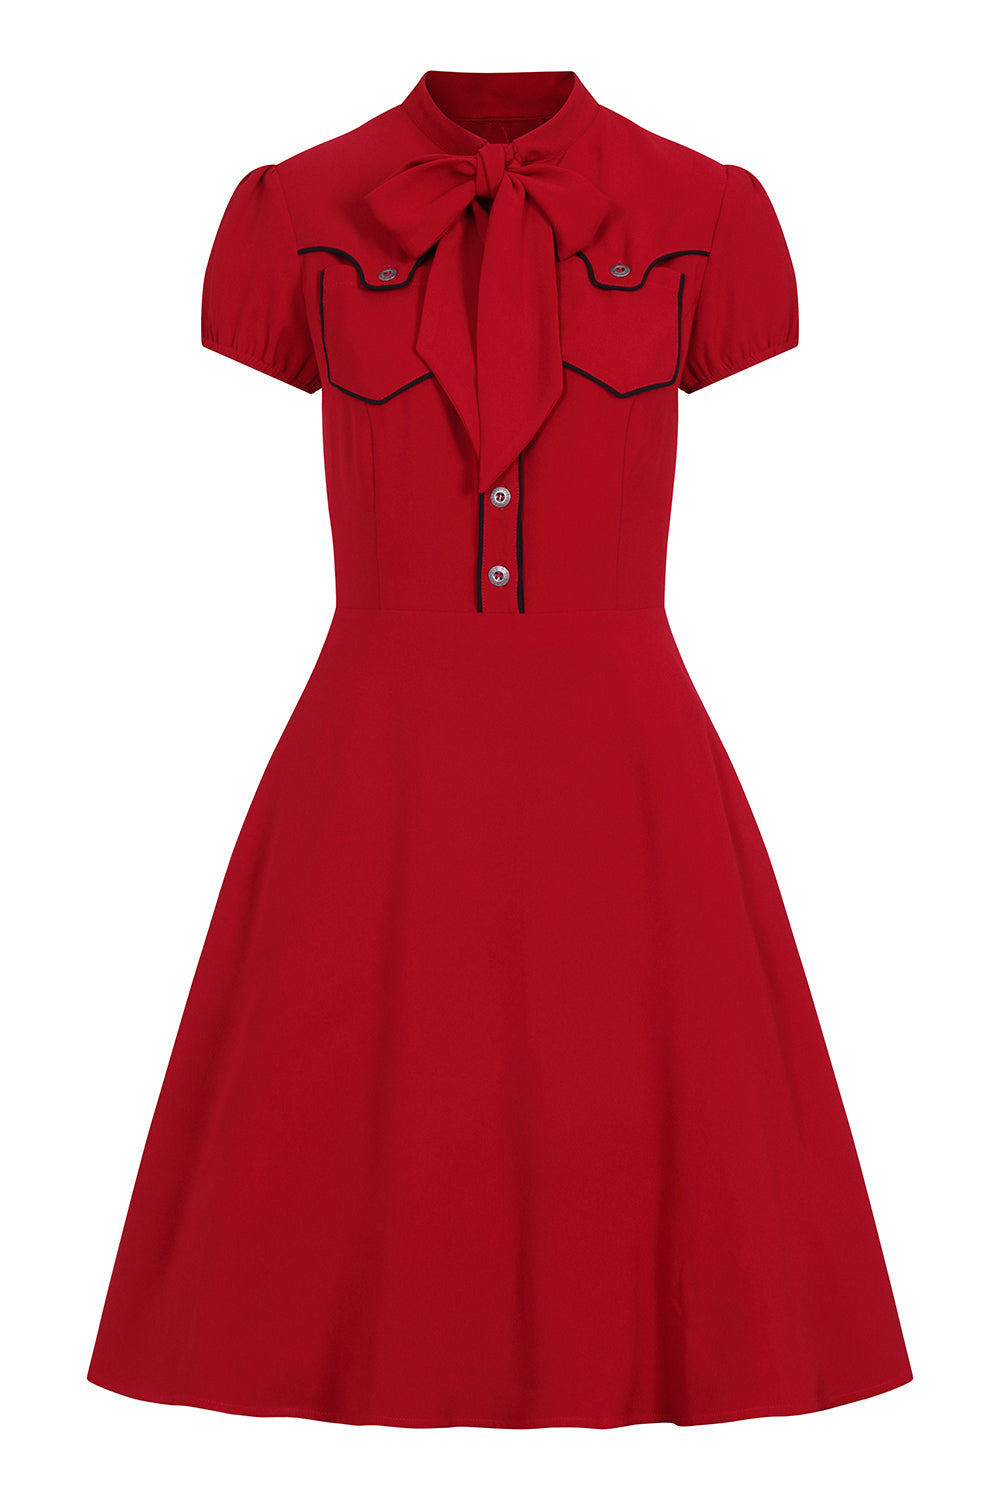 Millie Dress in Red by Hell Bunny